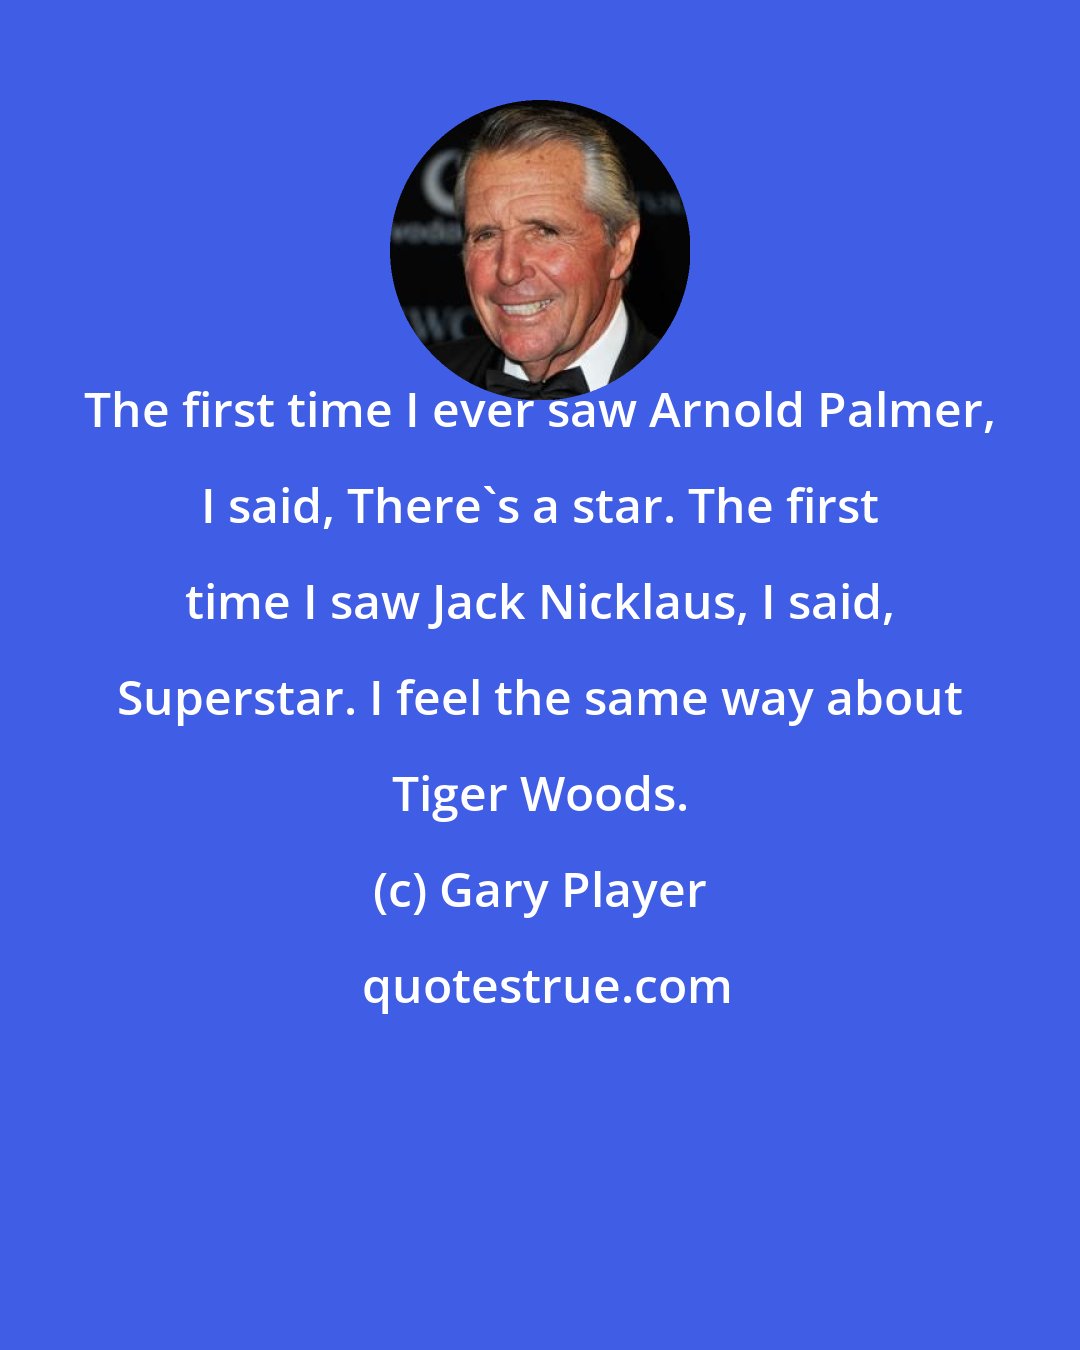 Gary Player: The first time I ever saw Arnold Palmer, I said, There's a star. The first time I saw Jack Nicklaus, I said, Superstar. I feel the same way about Tiger Woods.